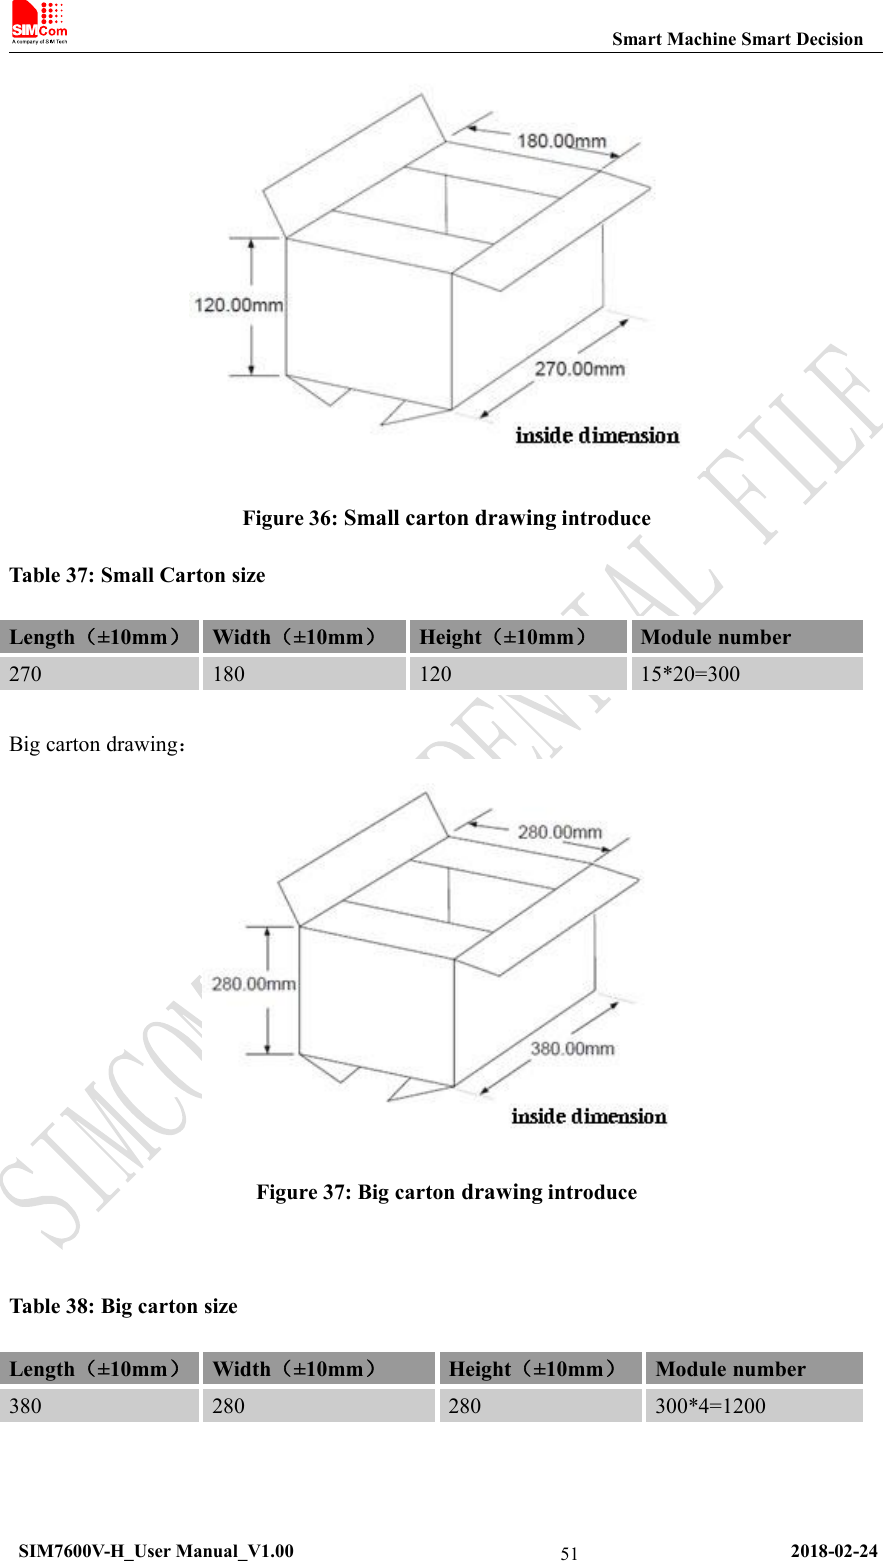 Smart Machine Smart DecisionSIM7600V-H_User Manual_V1.00 2018-02-2451Figure 36: Small carton drawing introduceTable 37: Small Carton sizeLength（±10mm）Width（±10mm）Height（±10mm）Module number27018012015*20=300Big carton drawing：Figure 37: Big carton drawing introduceTable 38: Big carton sizeLength（±10mm）Width（±10mm）Height（±10mm）Module number380280280300*4=1200